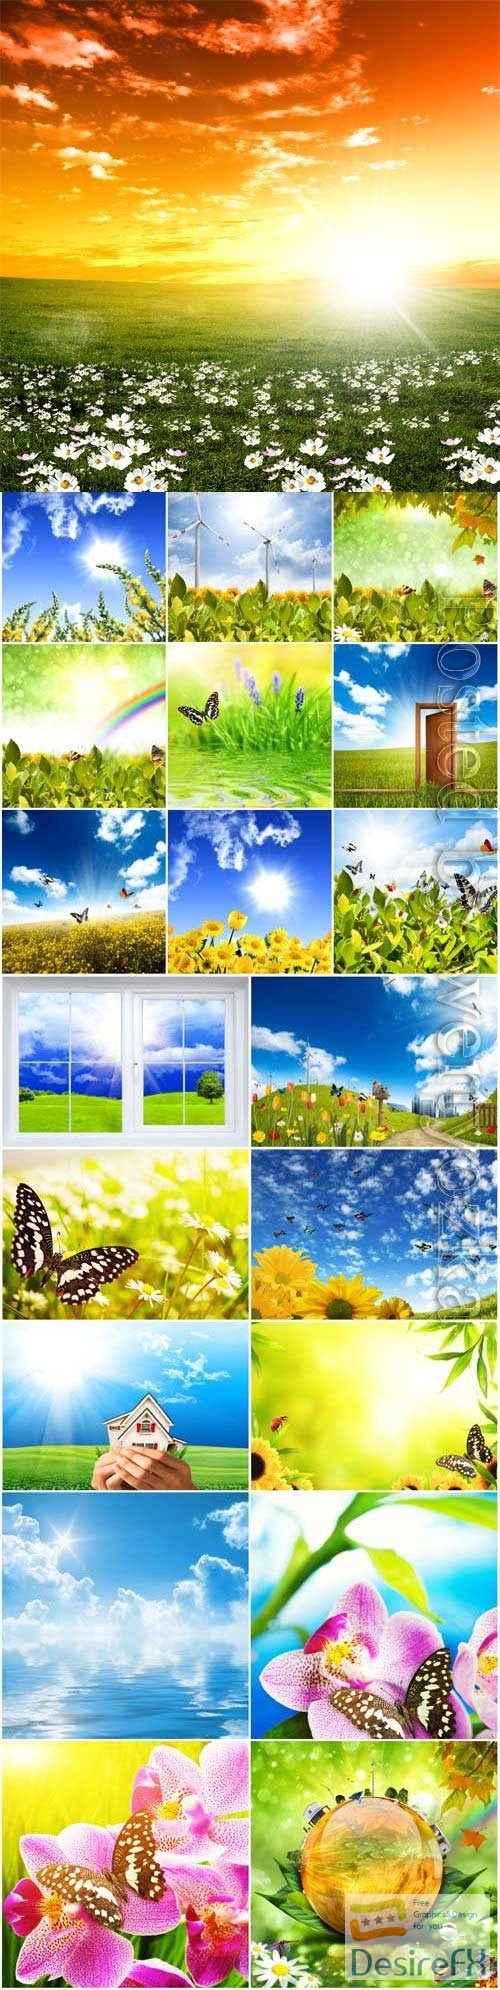 Floral summer backgrounds stock photo